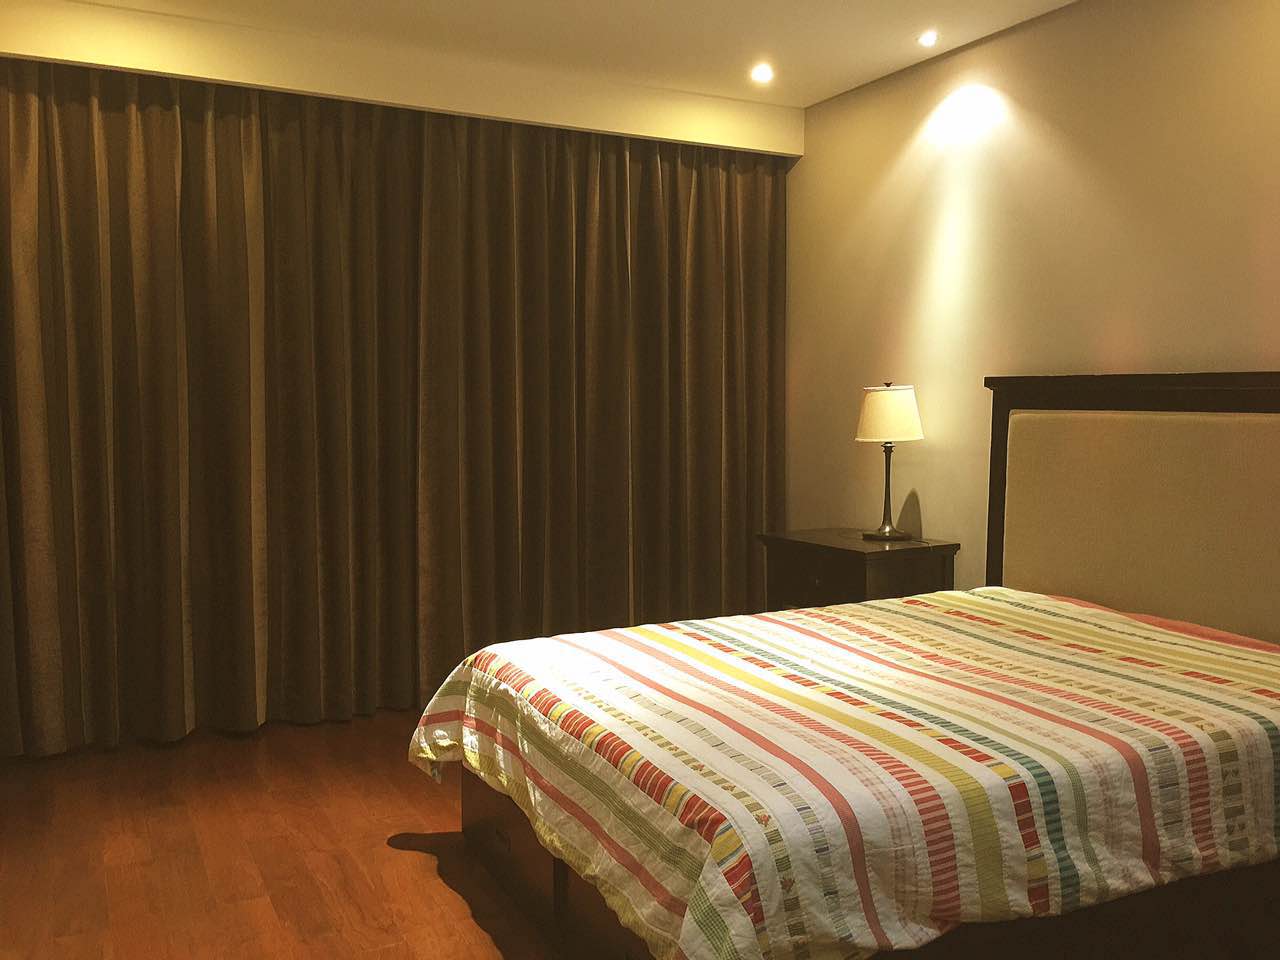 bedroom 2 Spacious Renovated Green City Apartment for Rent in Jingqiao Pudong